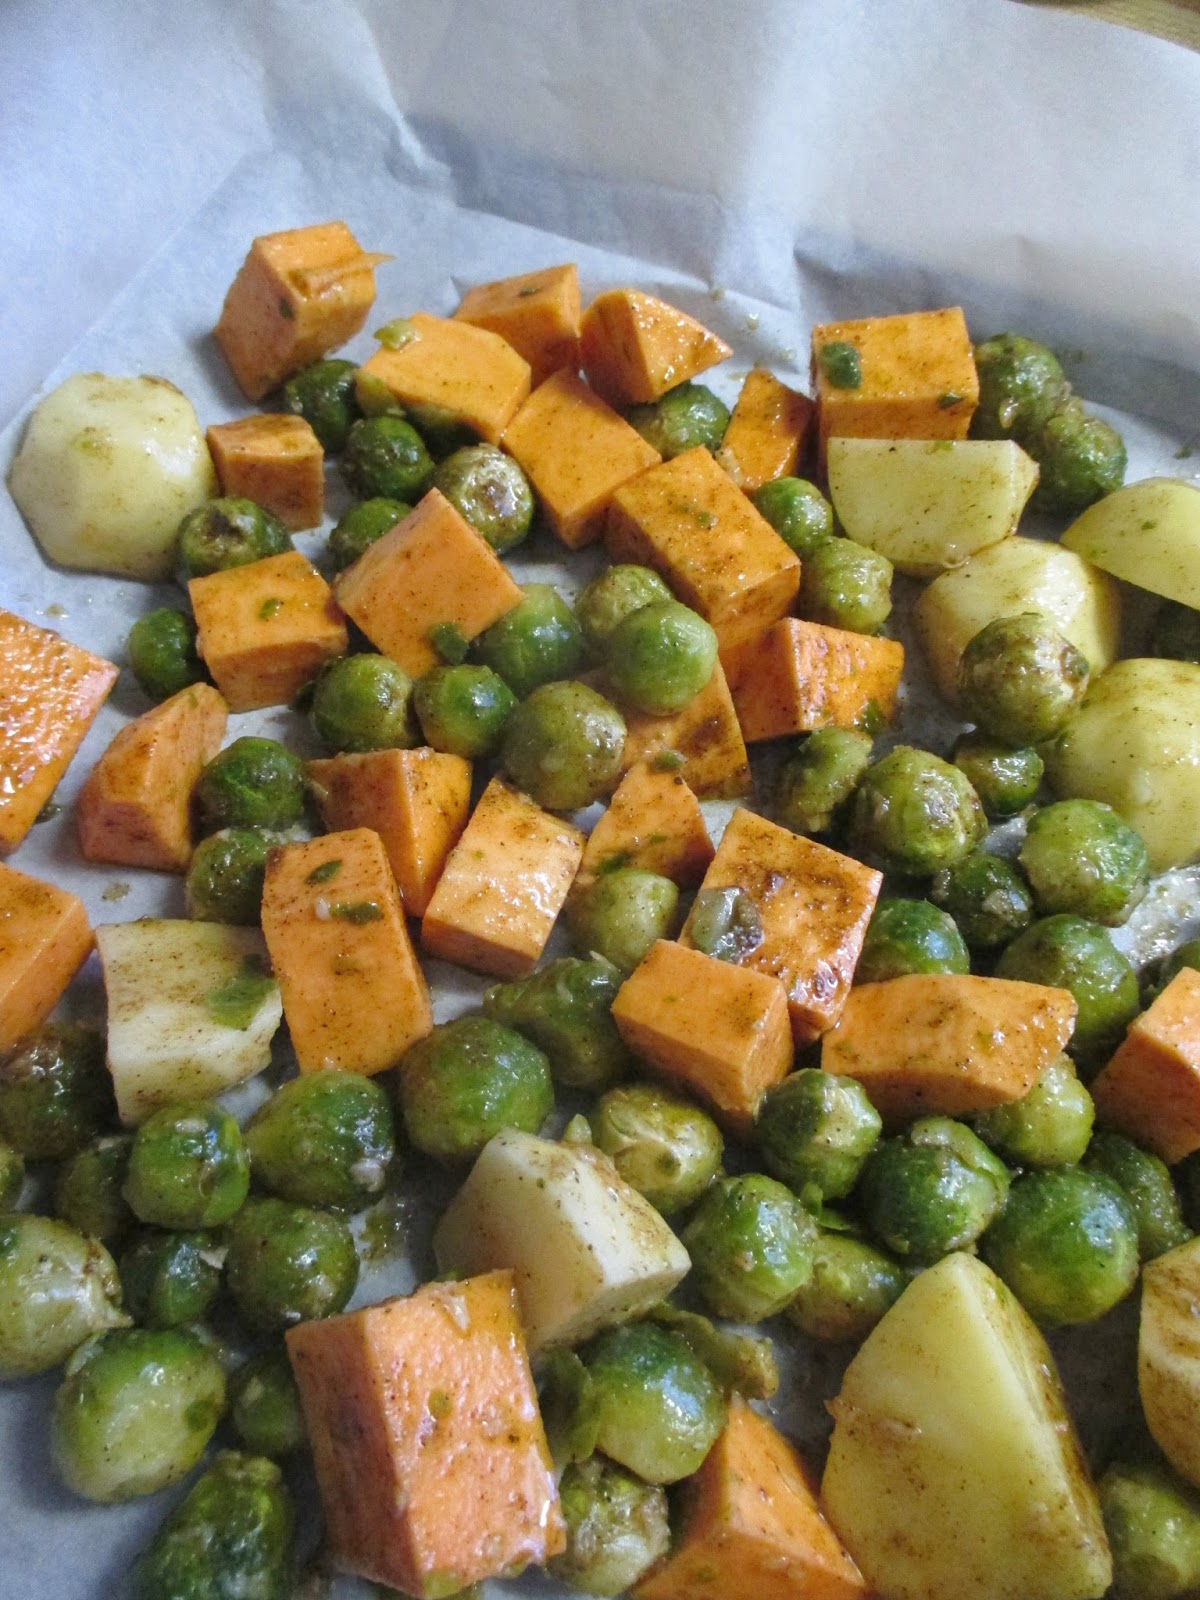 Just my Stuff: Roasted Brussels Sprouts with Potatoes